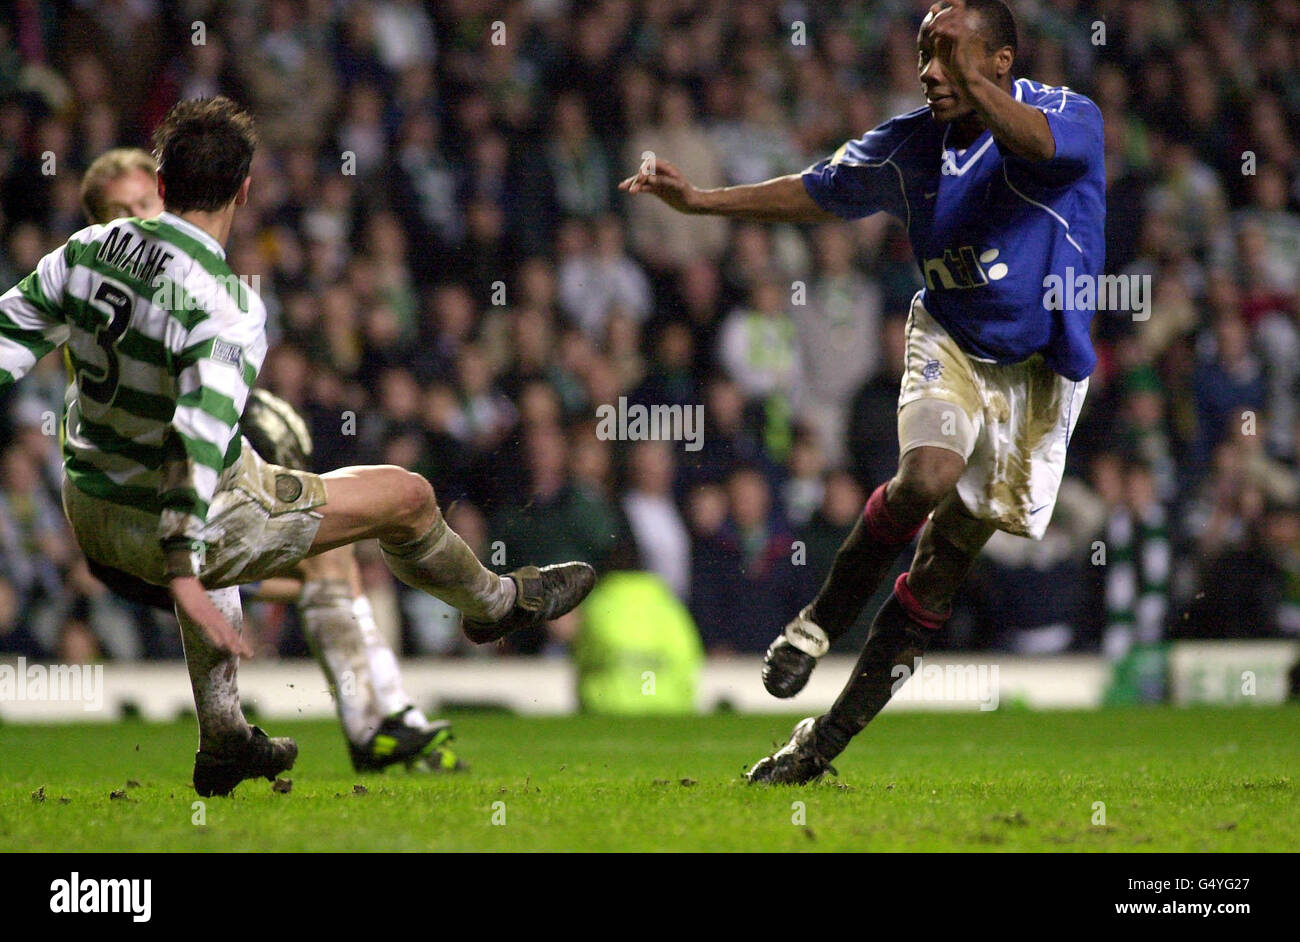 Glasgow Ranger's Rod Wallace (right) scores against Celtic during the  Scottish Premier Old Firm derby football match at Celtic Park in Glasgow  Stock Photo - Alamy